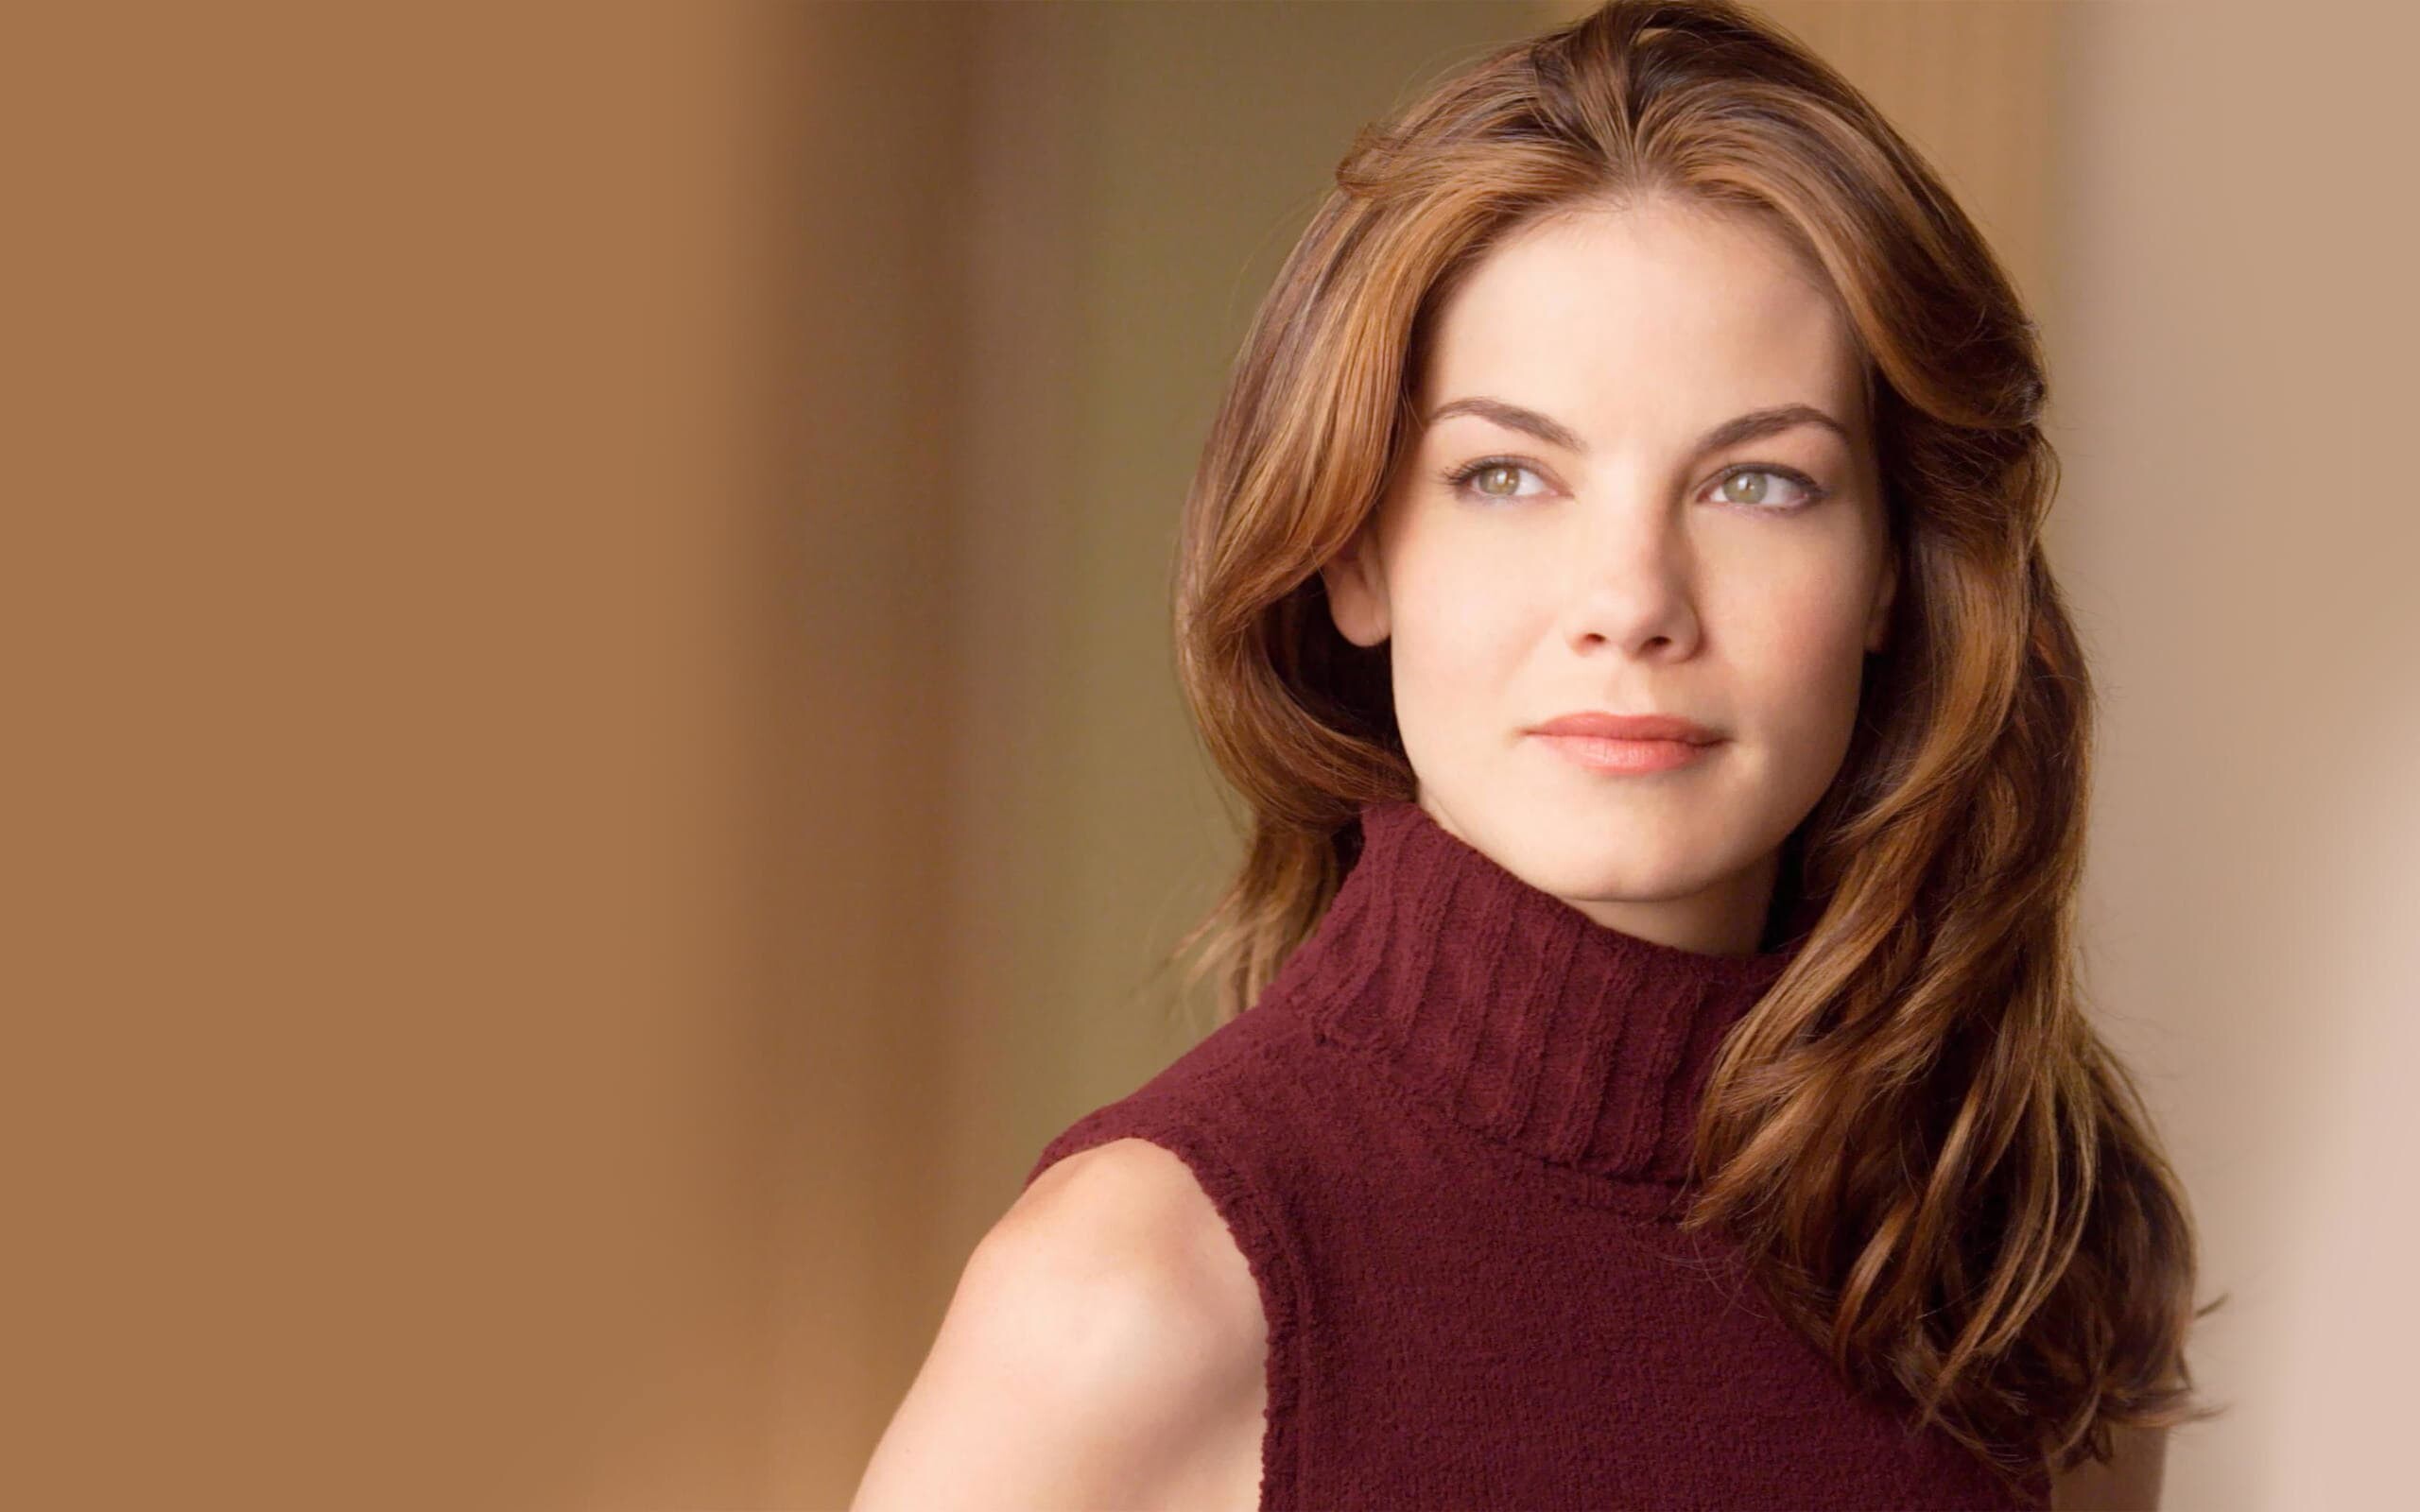 Michelle Monaghan: HBO anthology series True Detective, Irish-American actress, Over 30 movies and a number of TV shows. 2560x1600 HD Wallpaper.